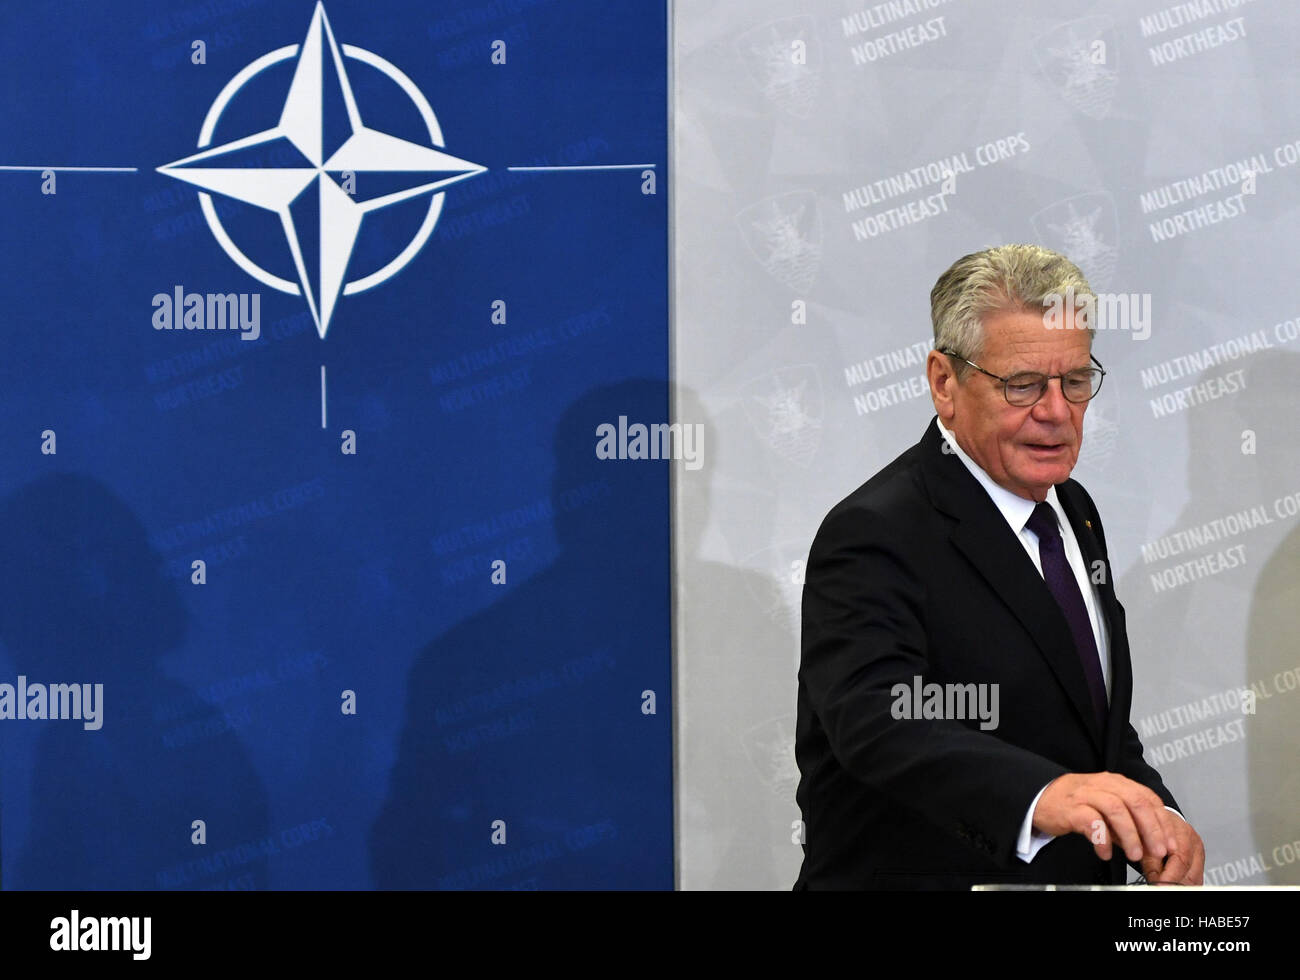 Szczecin, Poland. 28th Nov, 2016. German President Joachim Gauck pictured beside the NATO logo before a joint press conference with Polish President Andrzej Duda, after their visit to the NATO Multinational Corps Northeast, in Szczecin, Poland, 28 November 2016. Photo: Soeren Stache/dpa/Alamy Live News Stock Photo